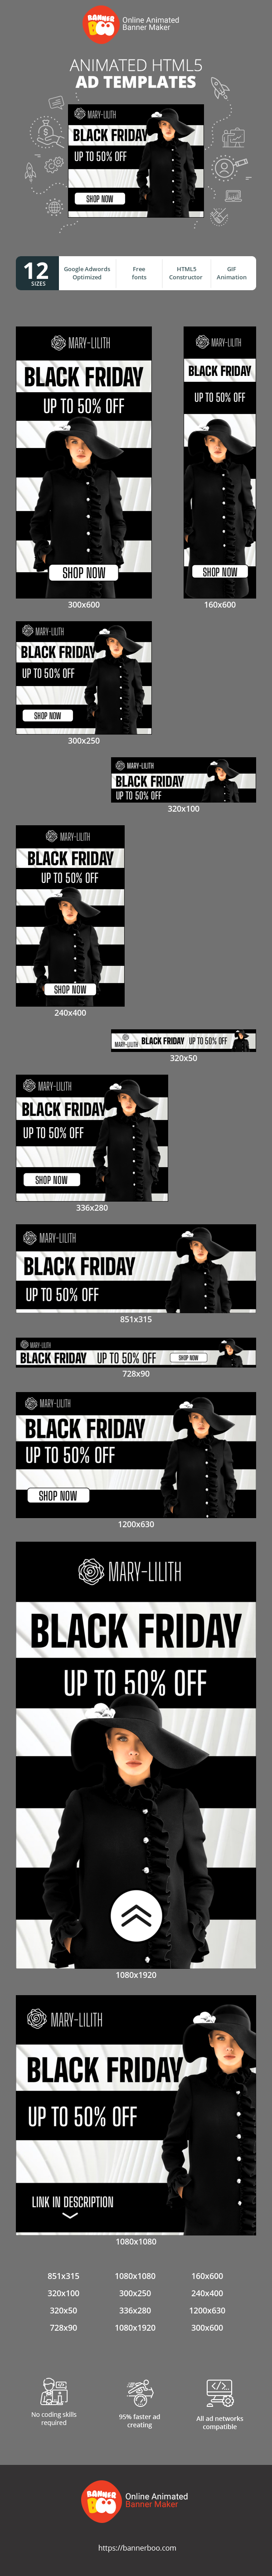 Banner ad template — Black Friday — Up To 50% Off Fashion